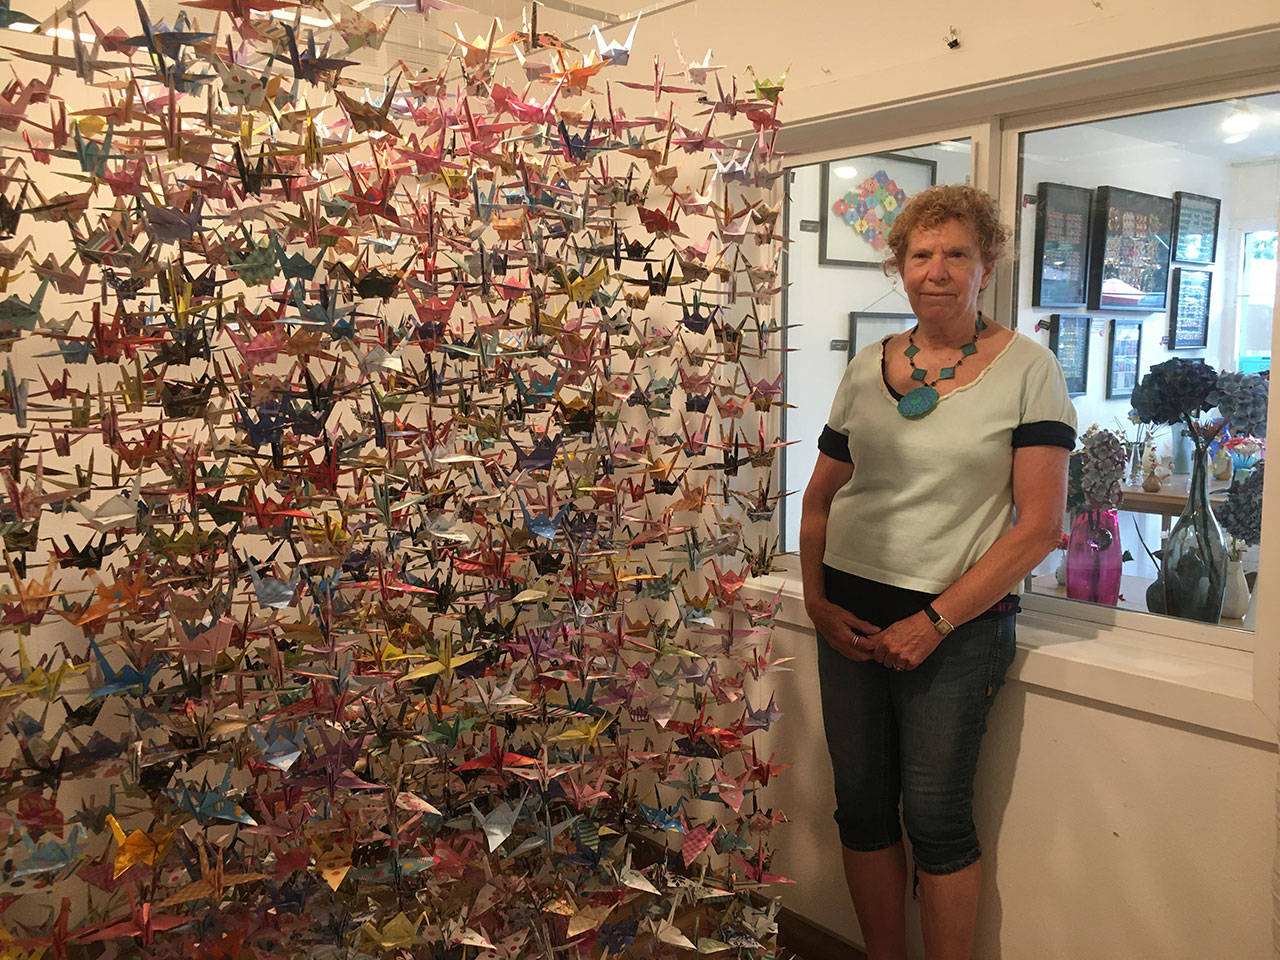 Alice Larson, origami artist and owner of Island Paper Chase, has painstakingly folded a paper crane for every life lost to COVID-19 in King County and created an artwork that displays them all. The gallery is located at 17635 Vashon Hwy. S.W. (Elizabeth Shepherd Photo).